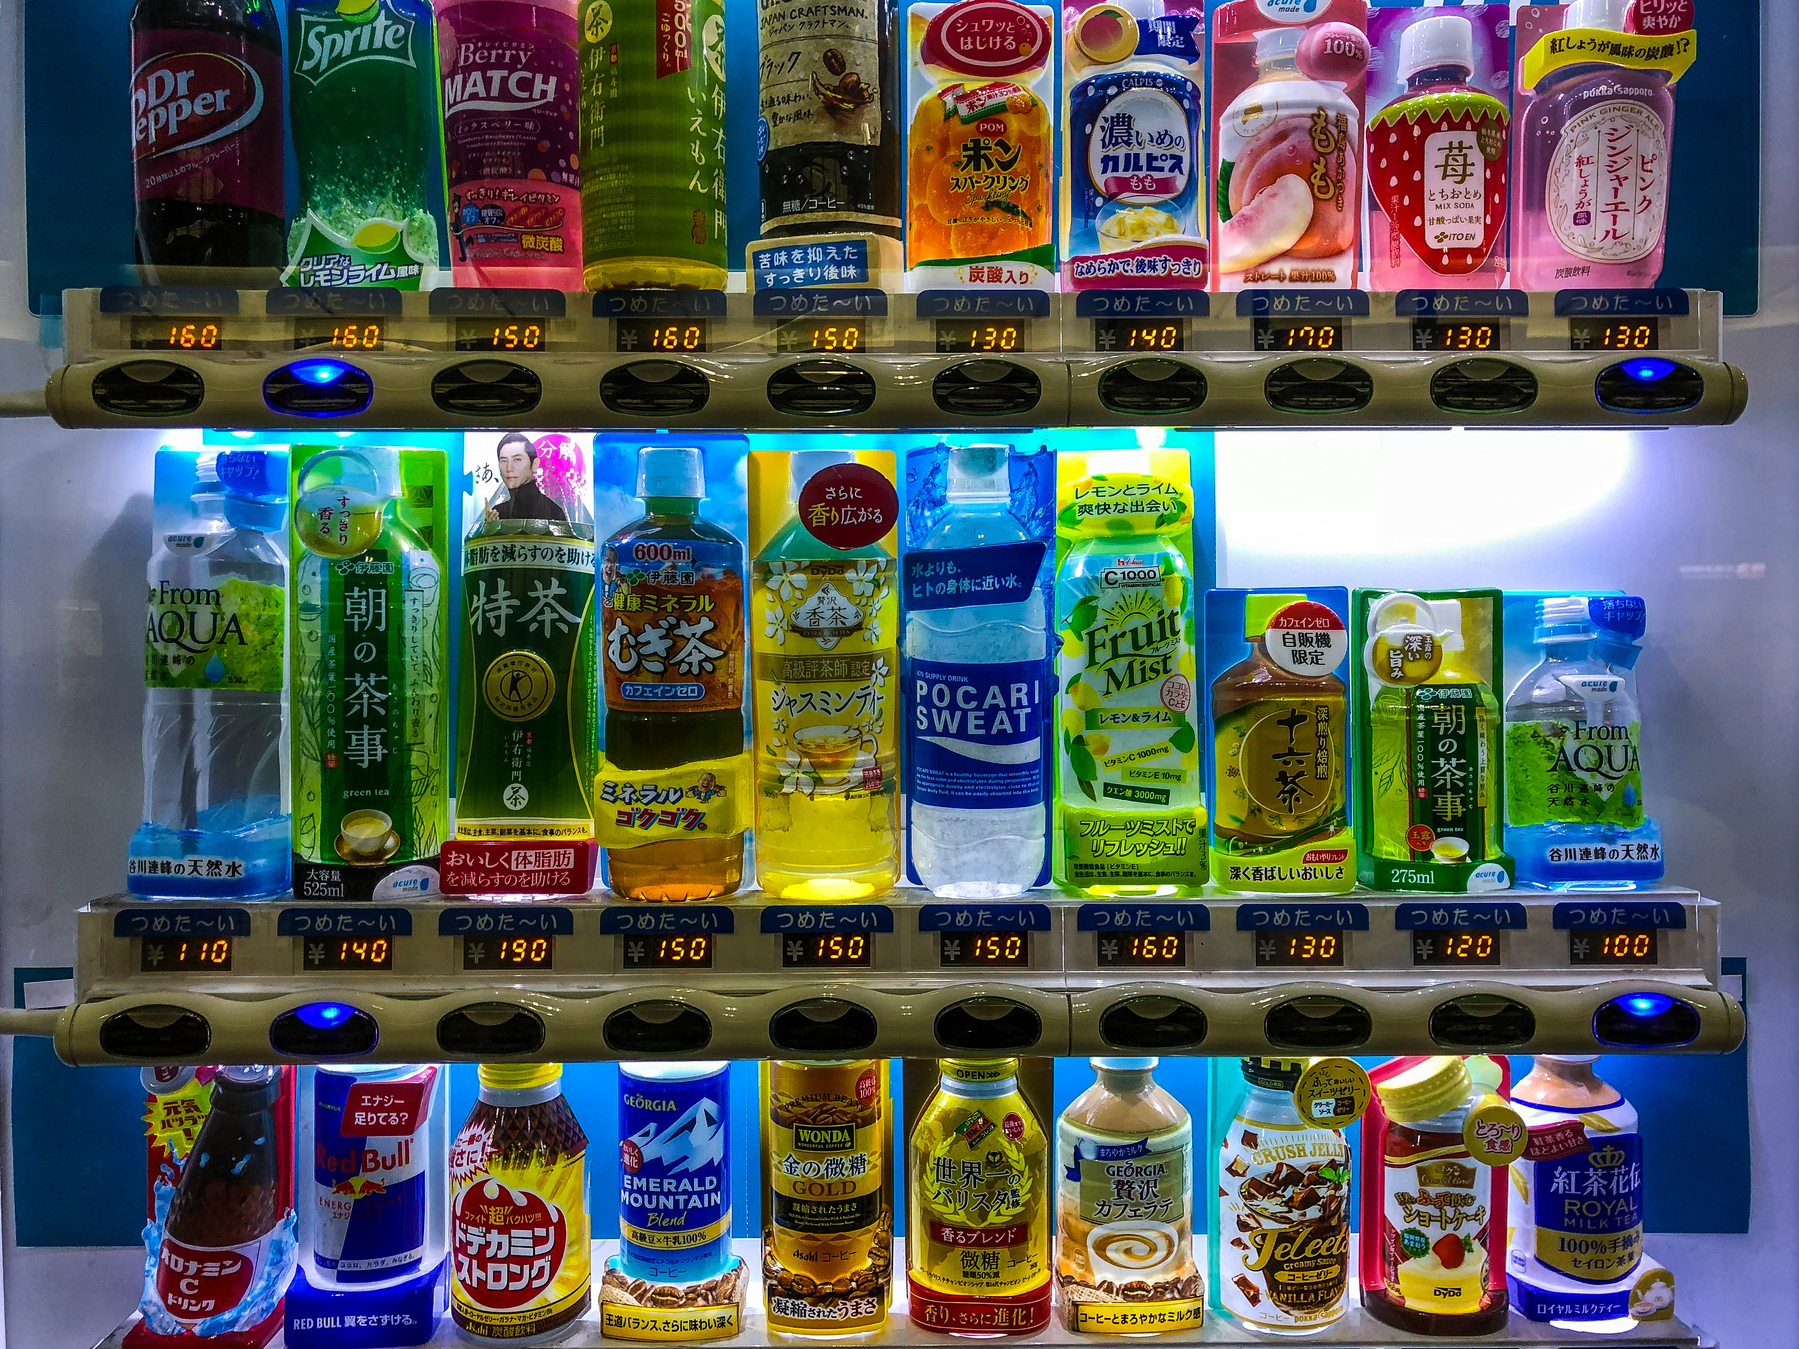 An assortment of colorful drinks on a vending machine.